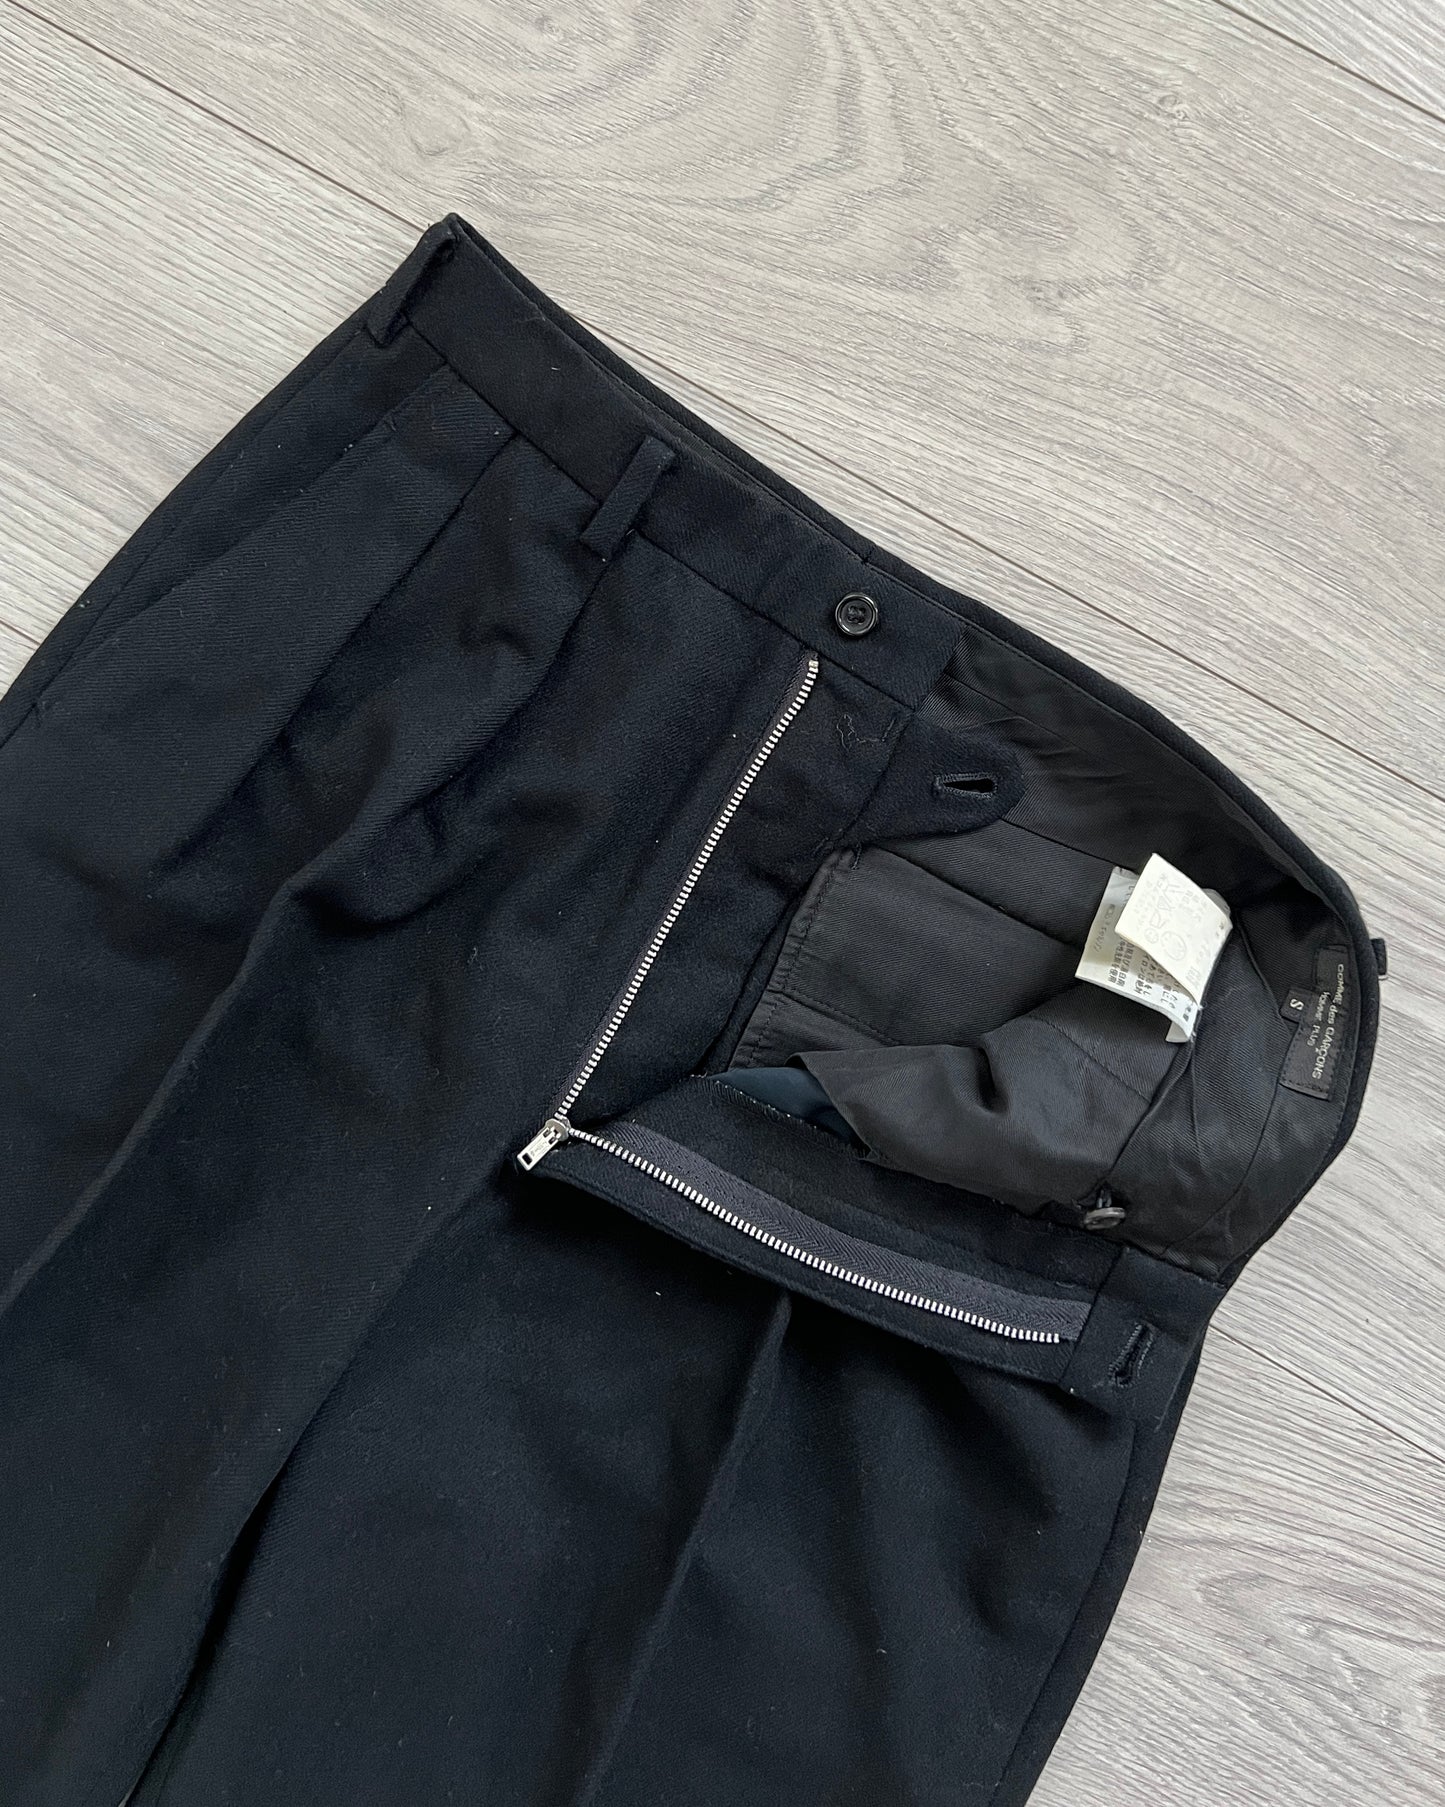 Comme Des Garcons Homme Plus 1990s Pleated Wool Trousers - Size 30